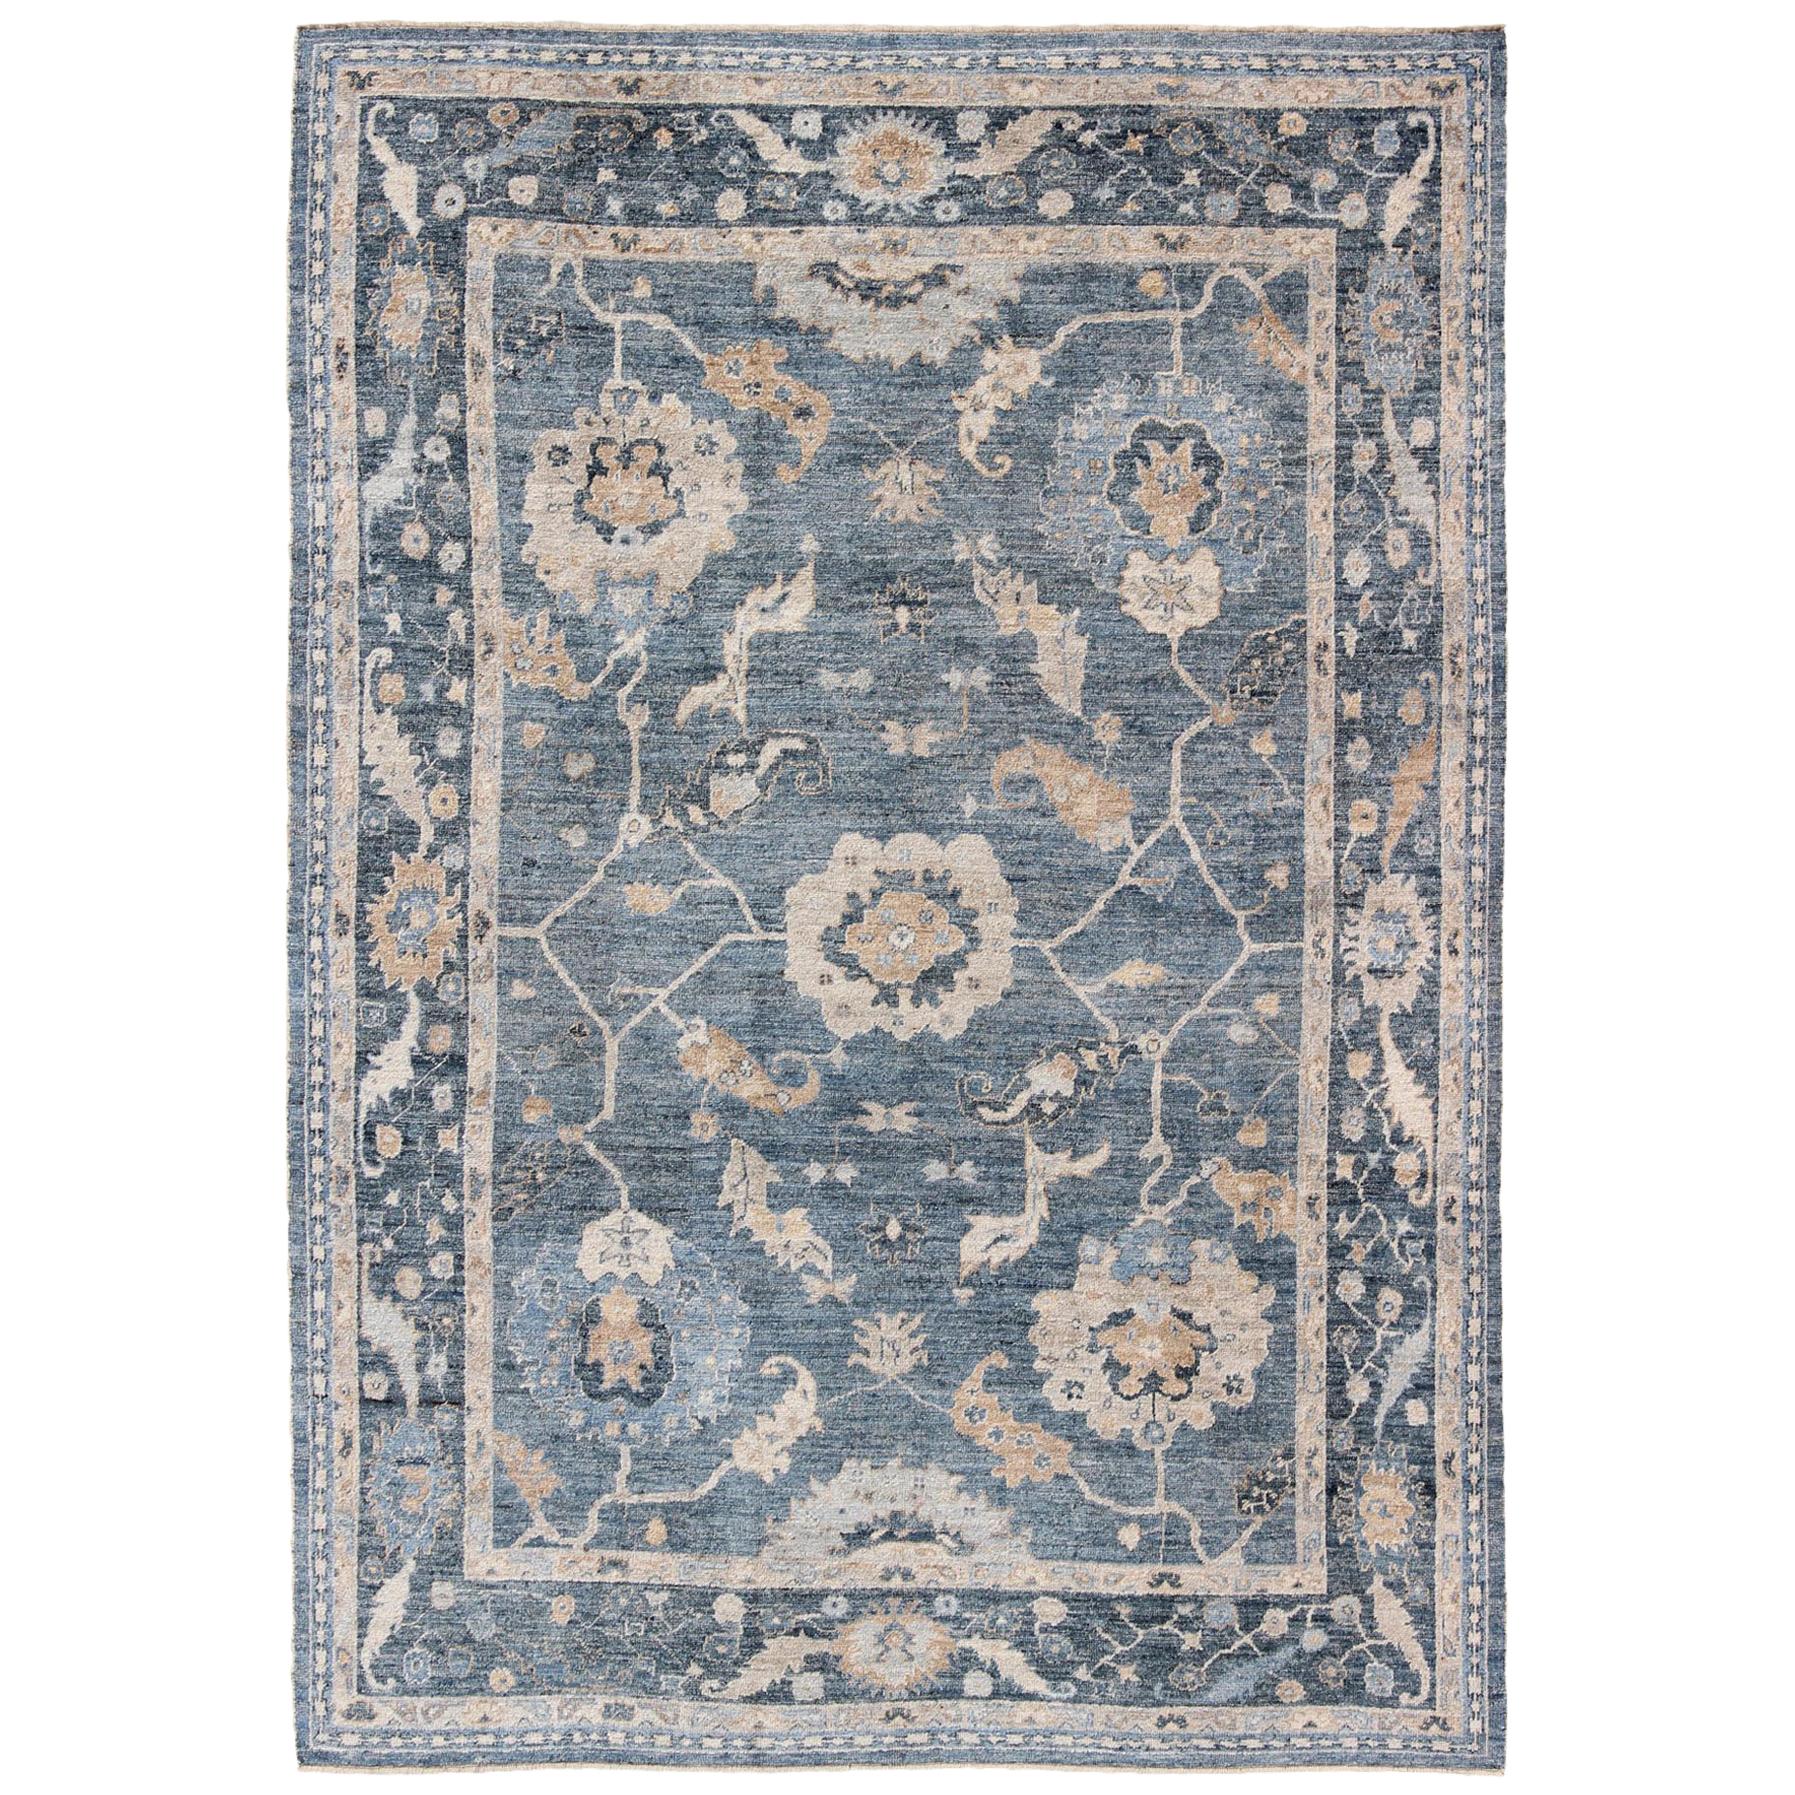 Angora Turkish Oushak Rug in Shades of Blue and Tan